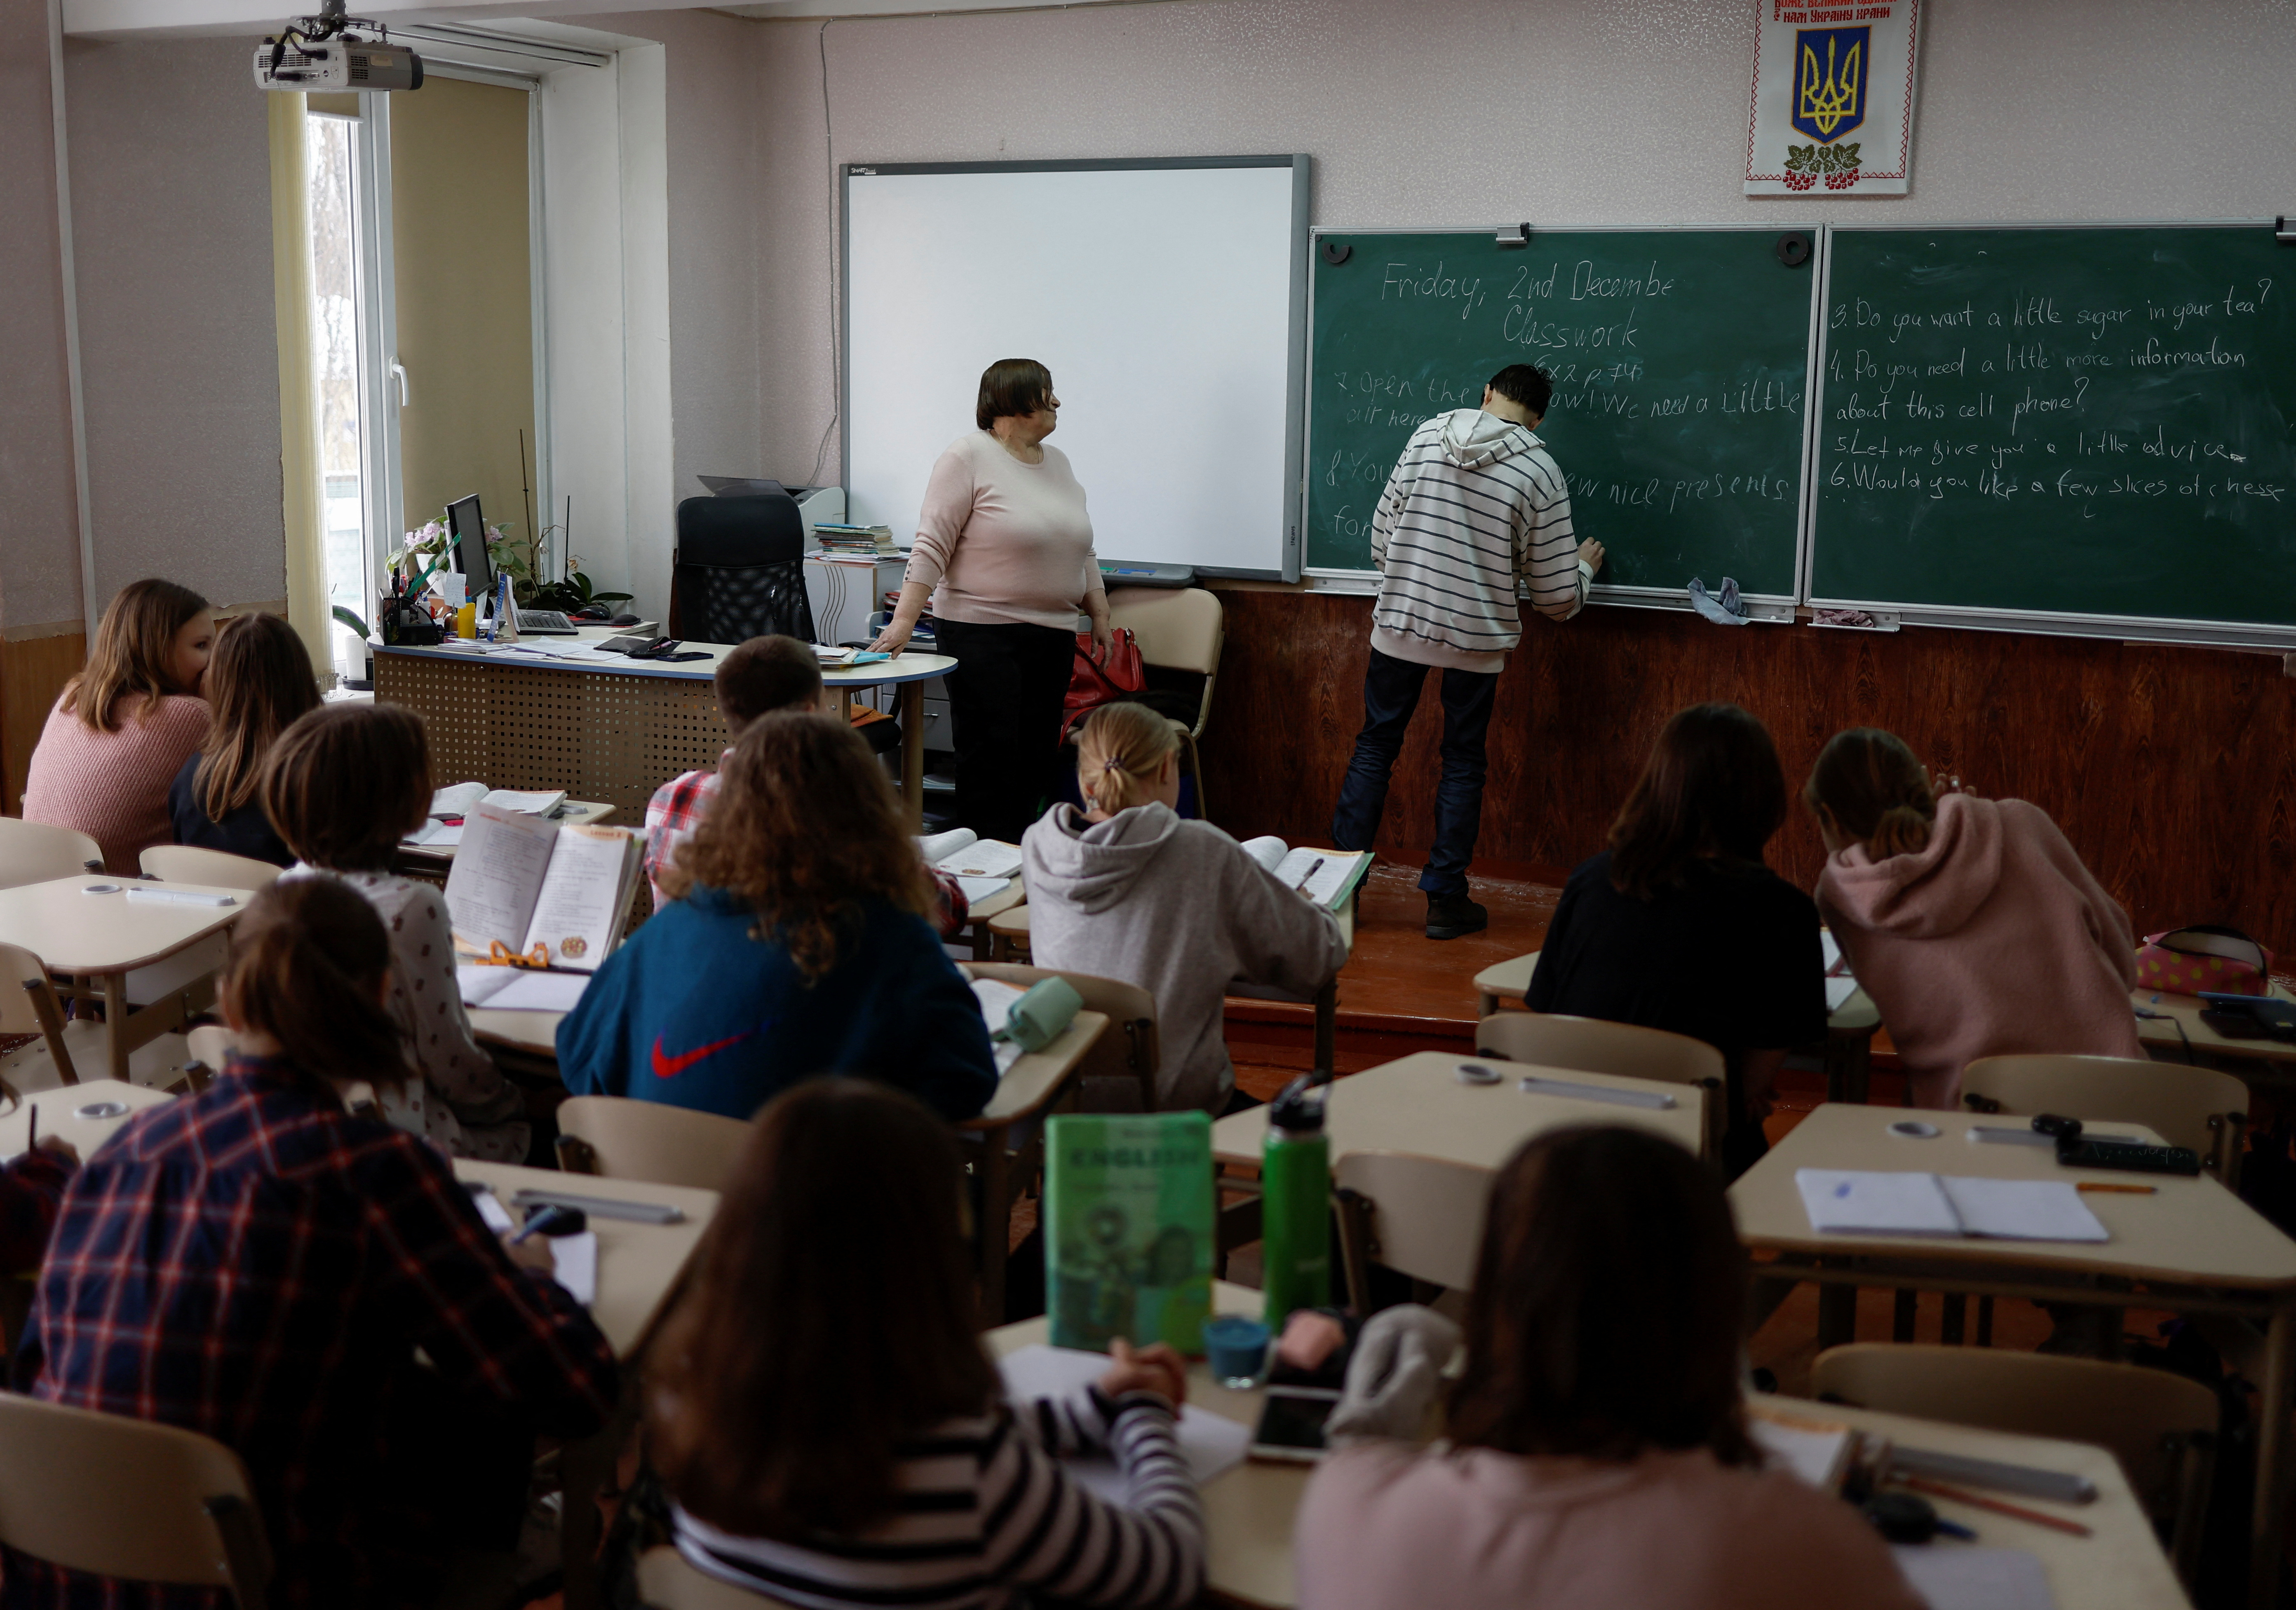 Students attend a lesson of English language in a classroom at a school in Kyiv